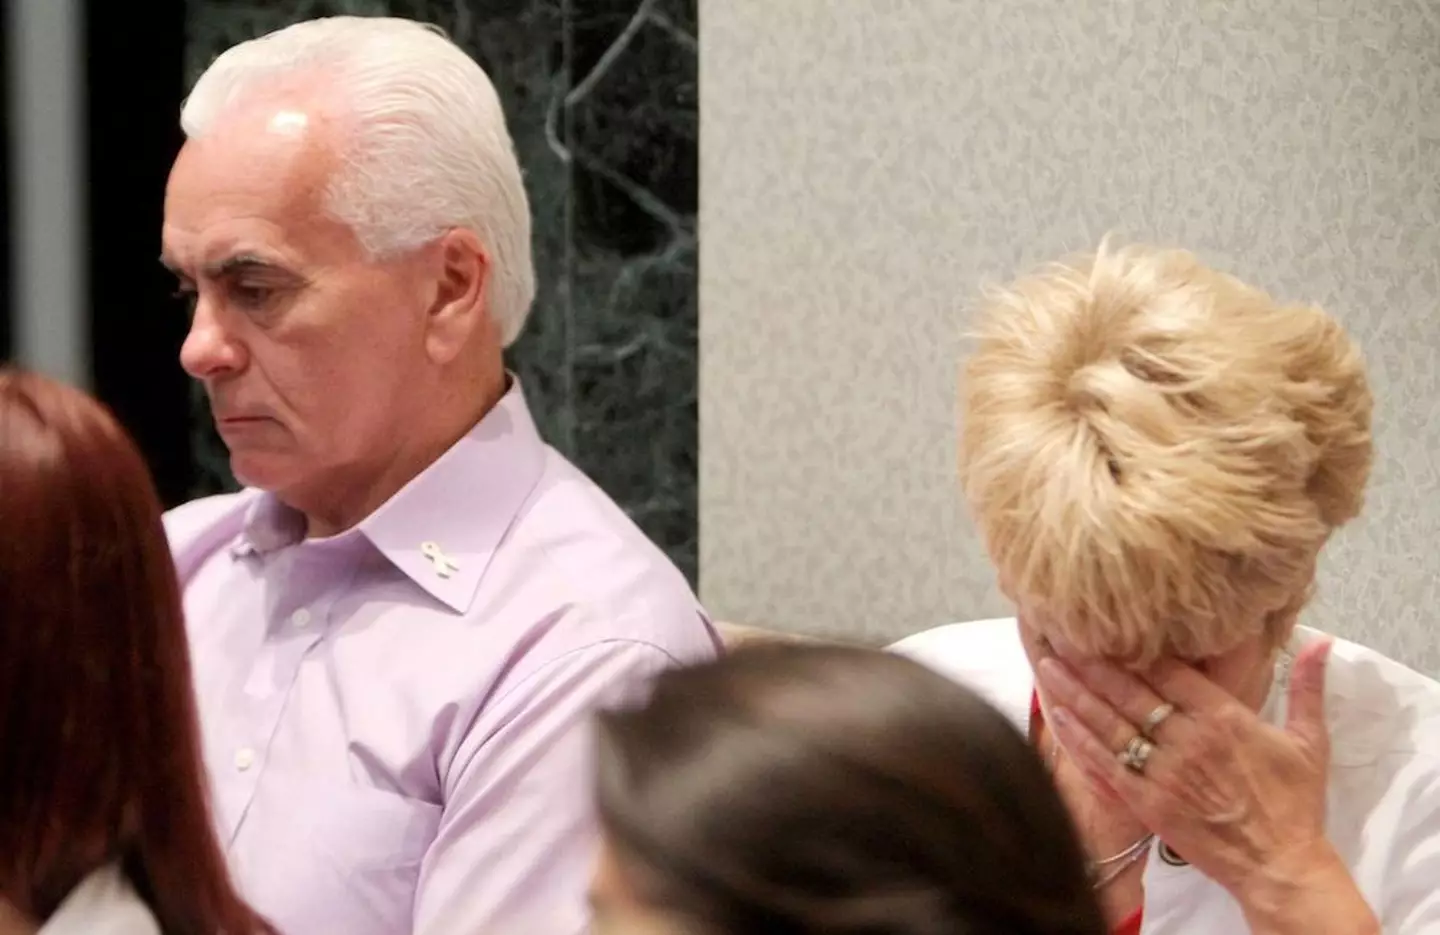 George and Cindy Anthony appeared distraught during the trial for their deceased granddaughter.